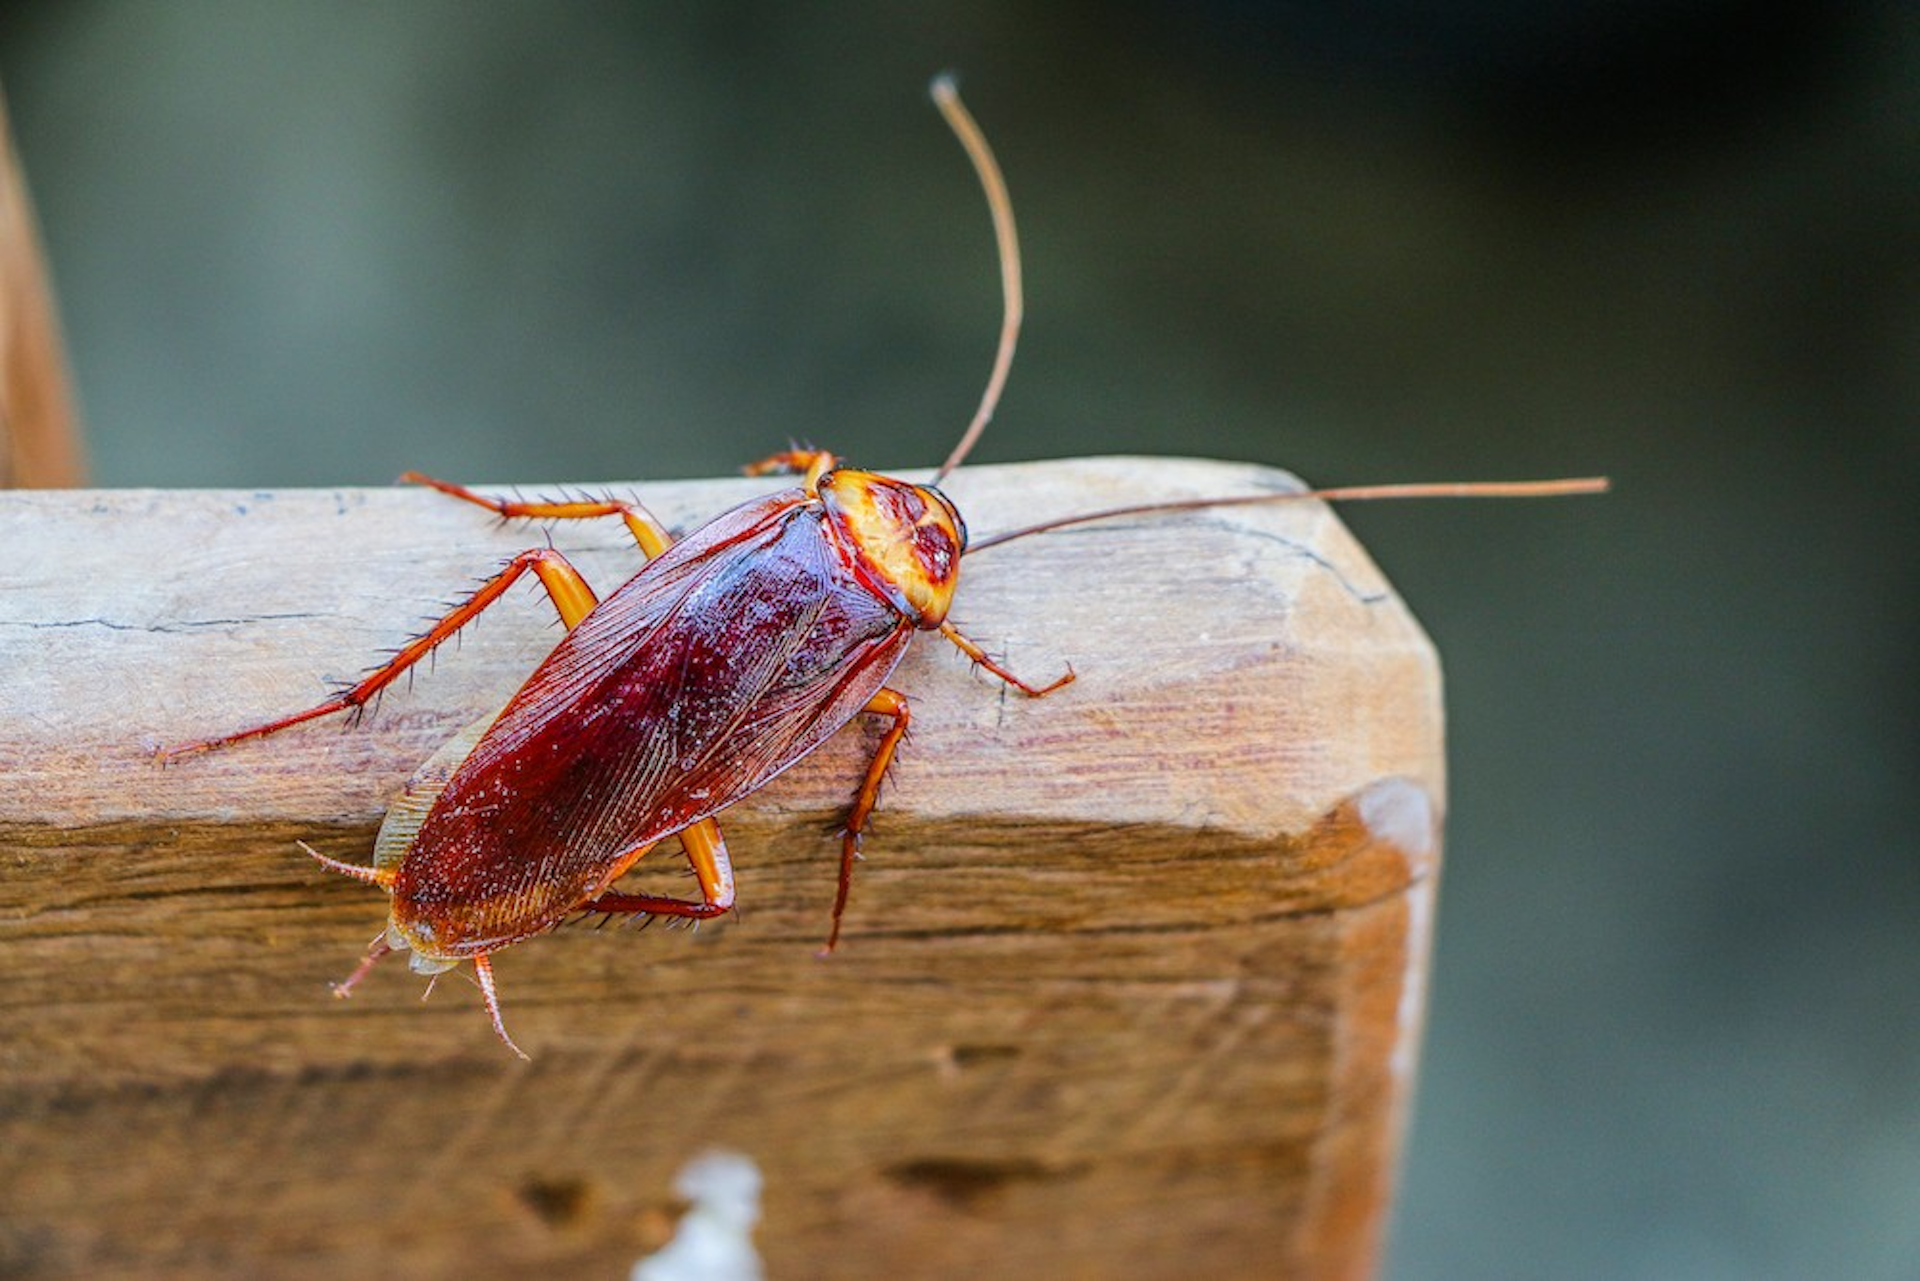 Cockroaches prefer to hide in dark, damp places